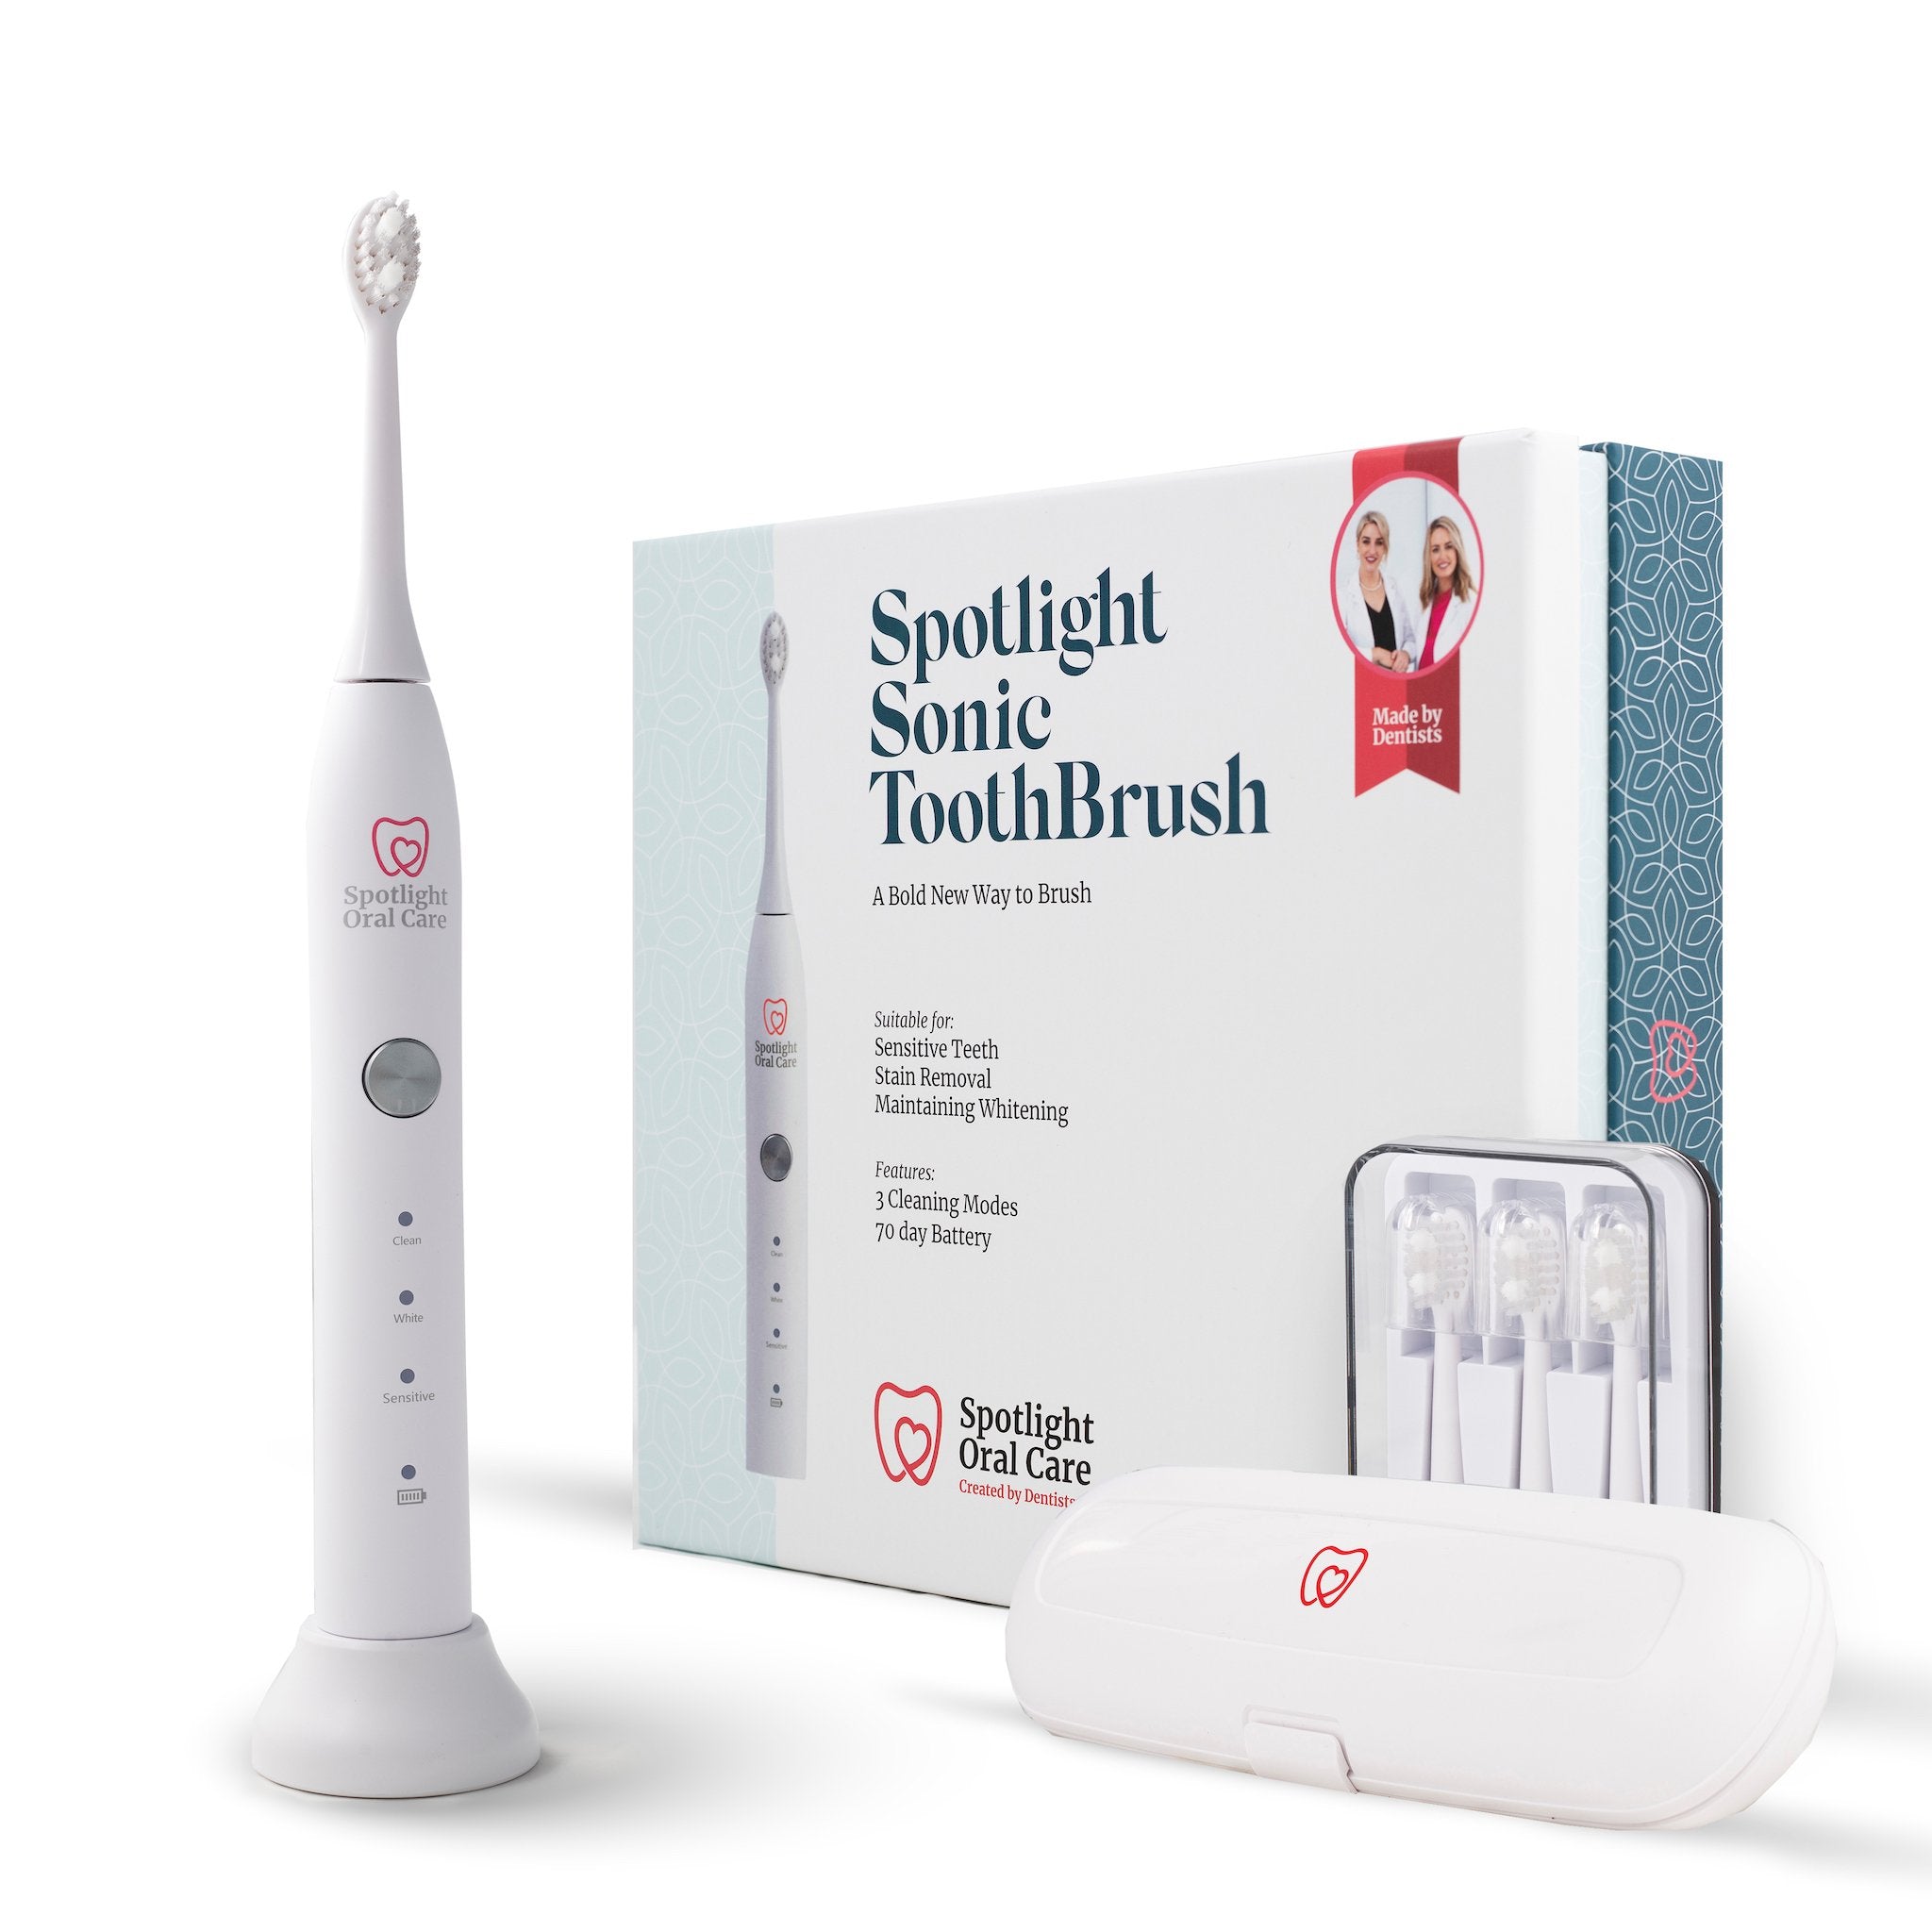 Spotlight Oral Care Sonic Toothbrush online at Hermosa, Ireland's Premium Beauty Store. (6587456815273)